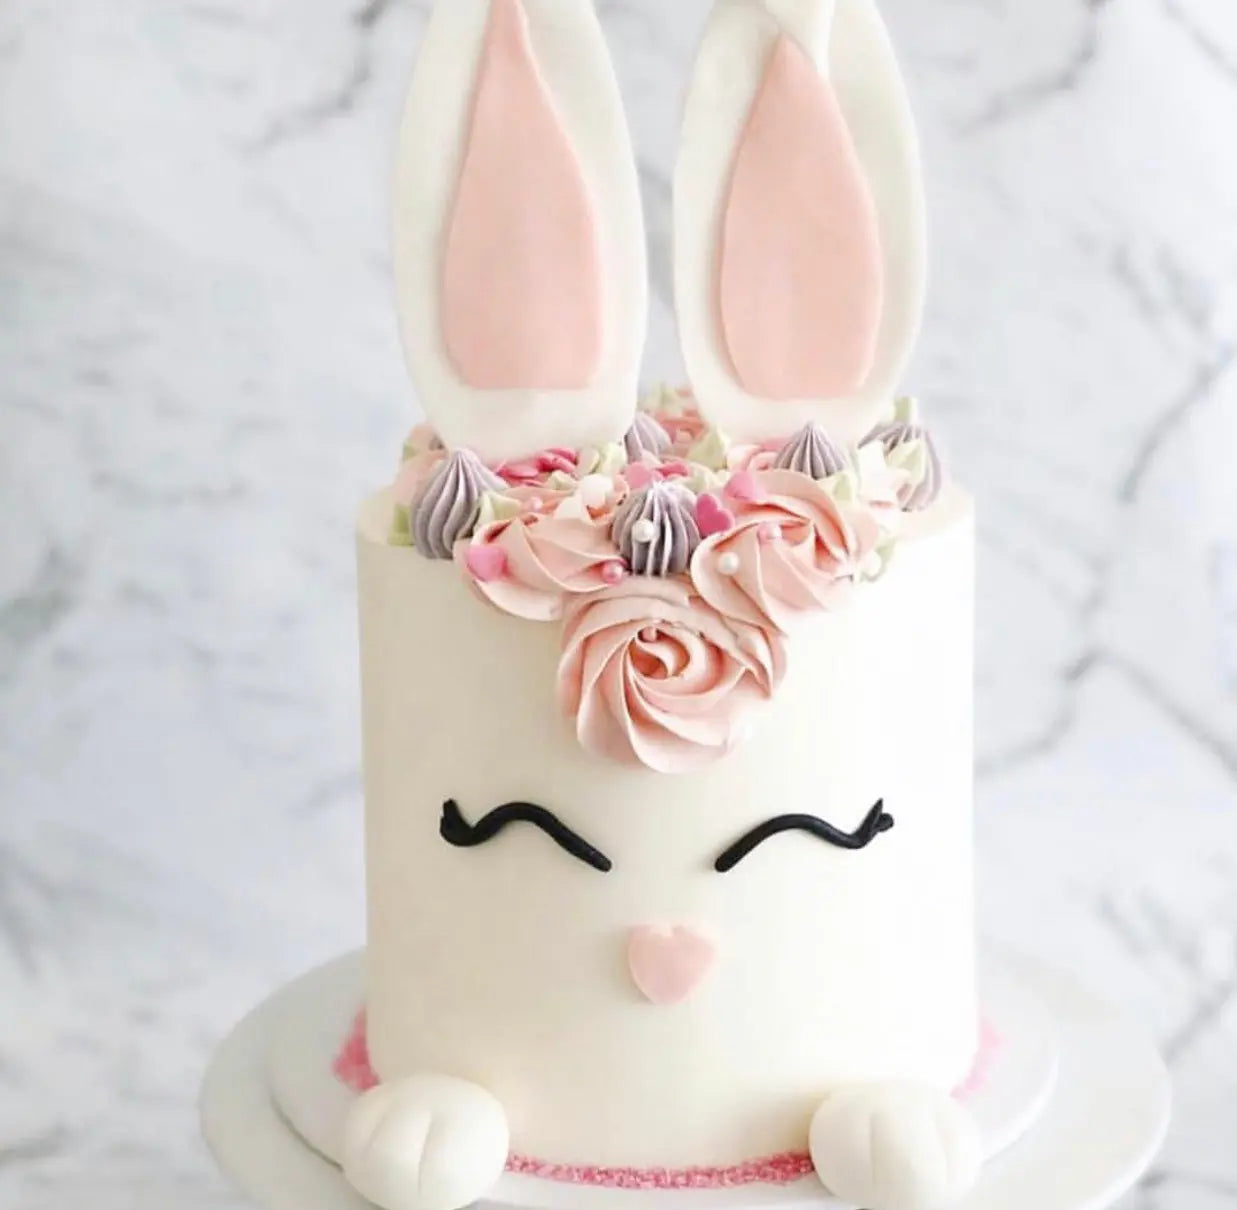 Some Bunny Loves you Cake